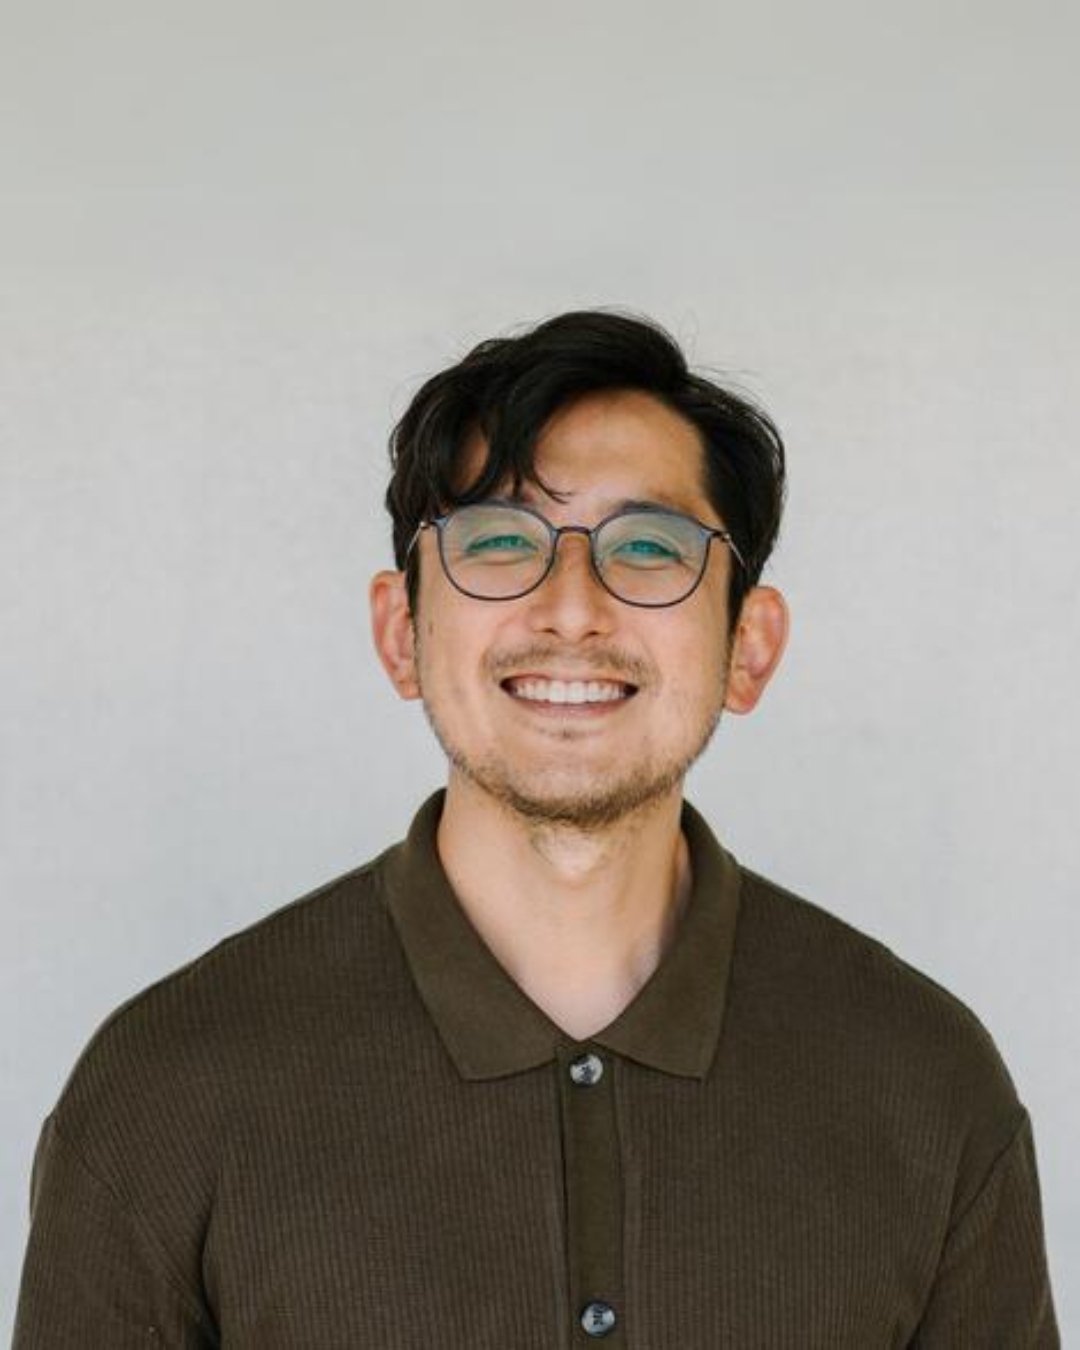 Hello church! This week's announcements:

- We're excited to welcome Pastor Jason Min, Lead Pastor of Citizens LA, as our guest speaker this Sunday! Pastor Jason holds a B.A. in Communications and History from the University of Pennsylvania, an M.Ed.